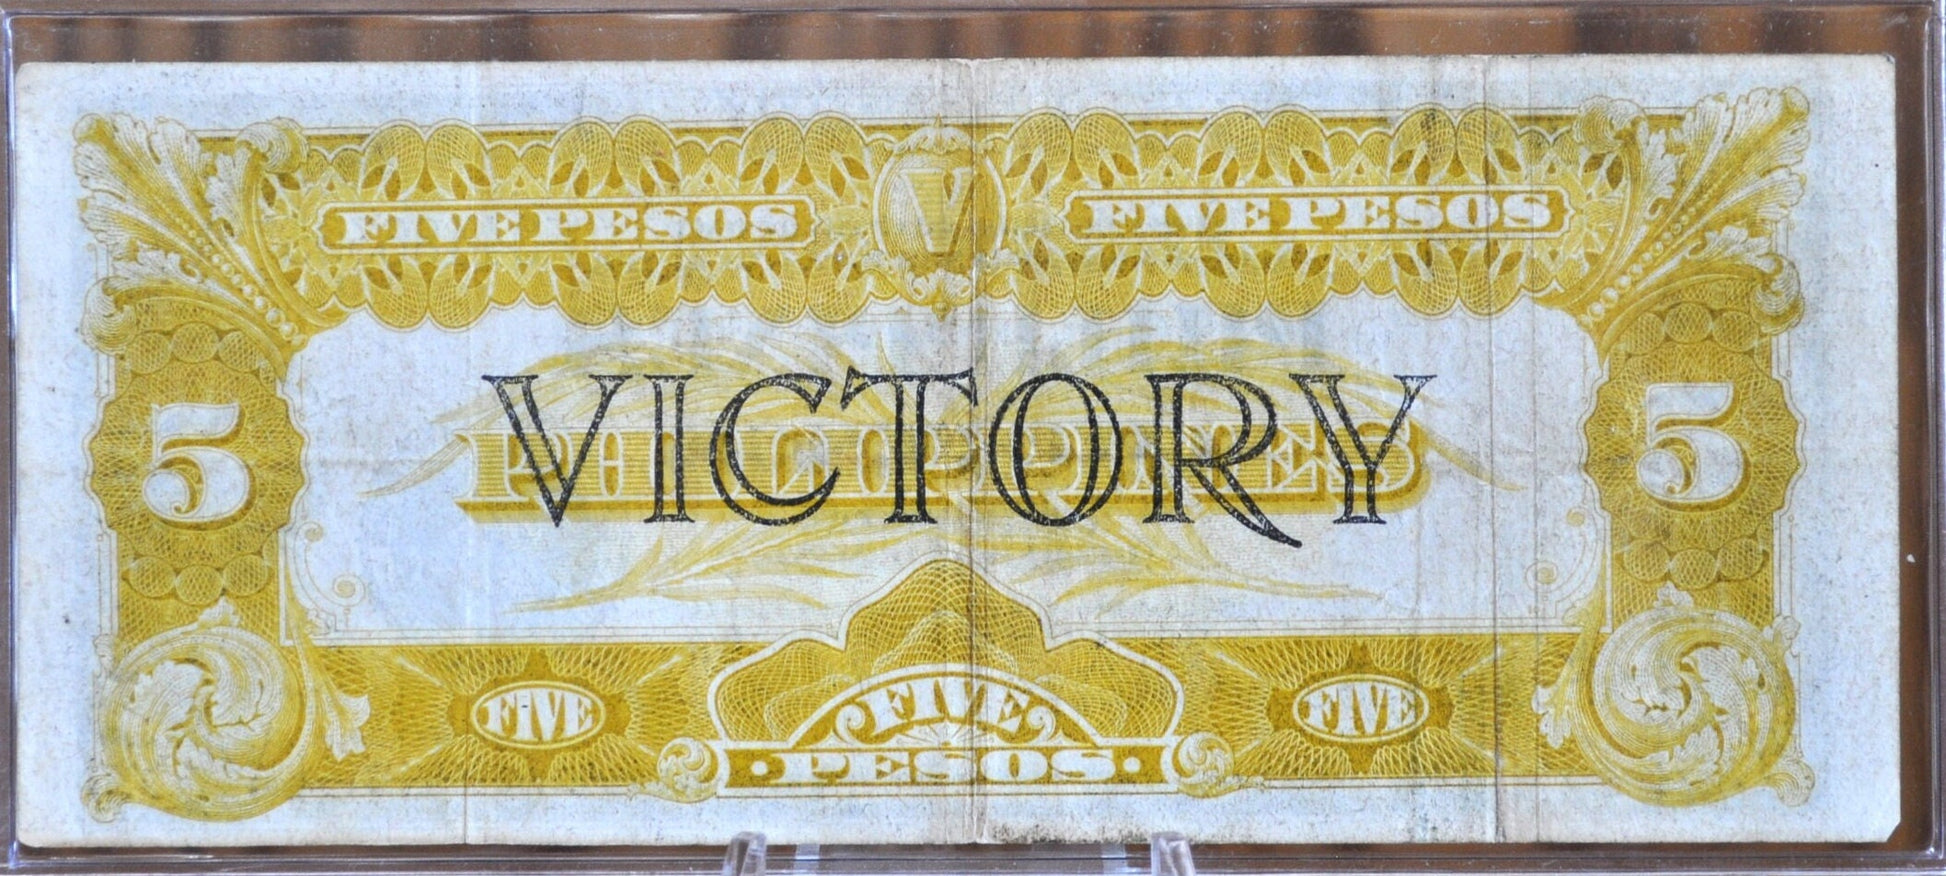 1944 Philippines 5 Pesos Victory Treasury Certificate, Rarer Note - Great Condition - 1944 Five Pesos WWII Victory Treasury Note 1944 P# 96a